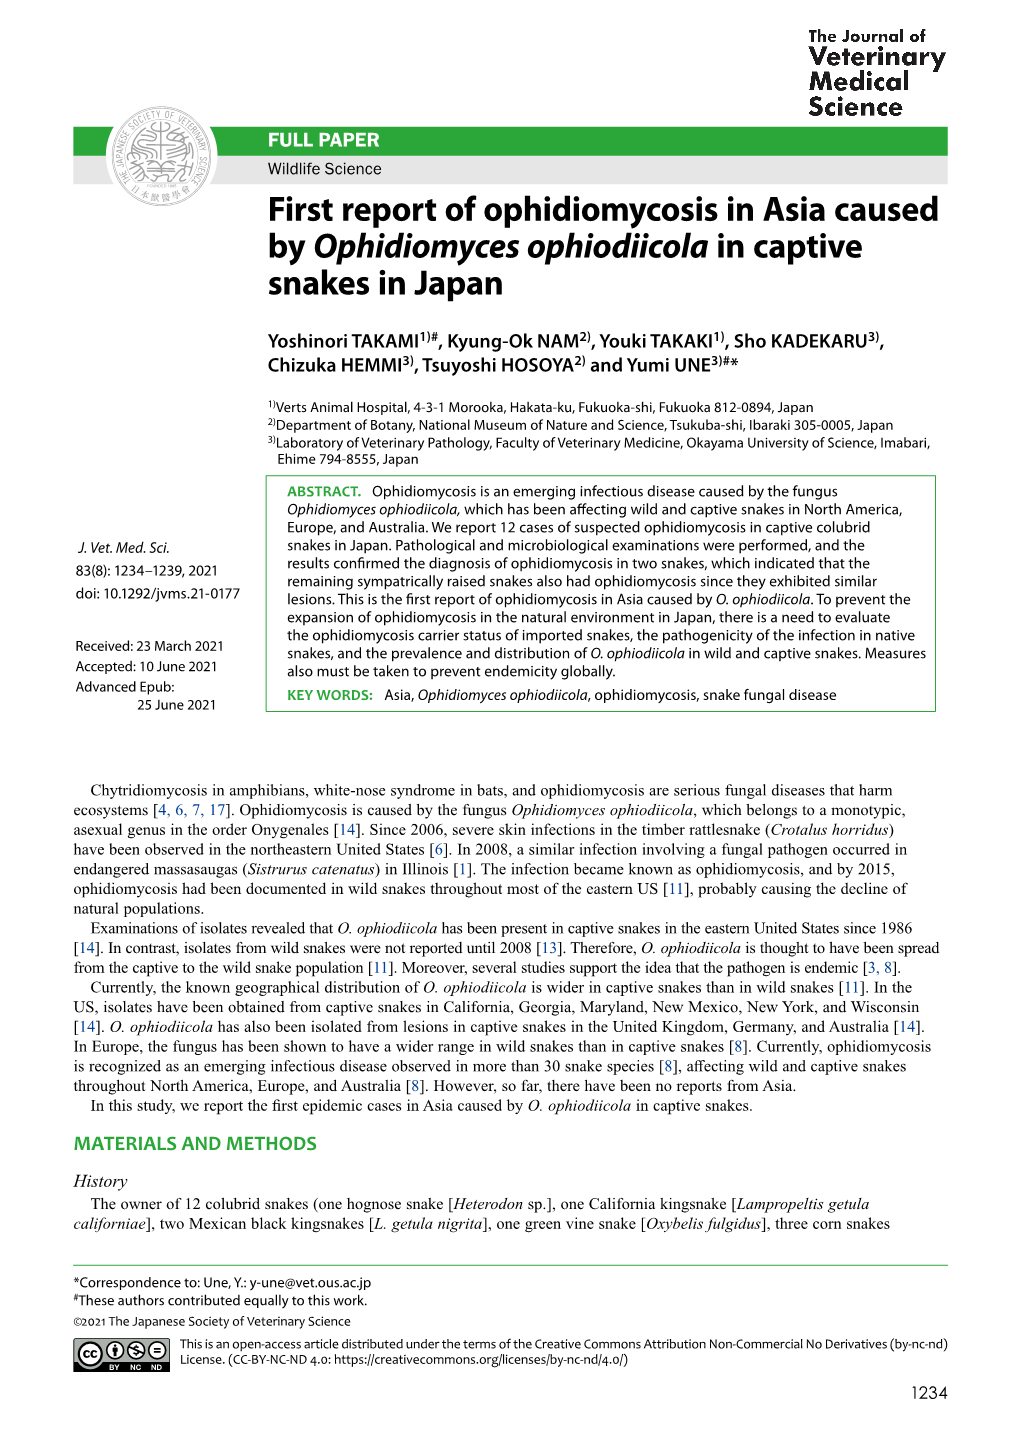 First Report of Ophidiomycosis in Asia Caused by Ophidiomyces Ophiodiicola in Captive Snakes in Japan